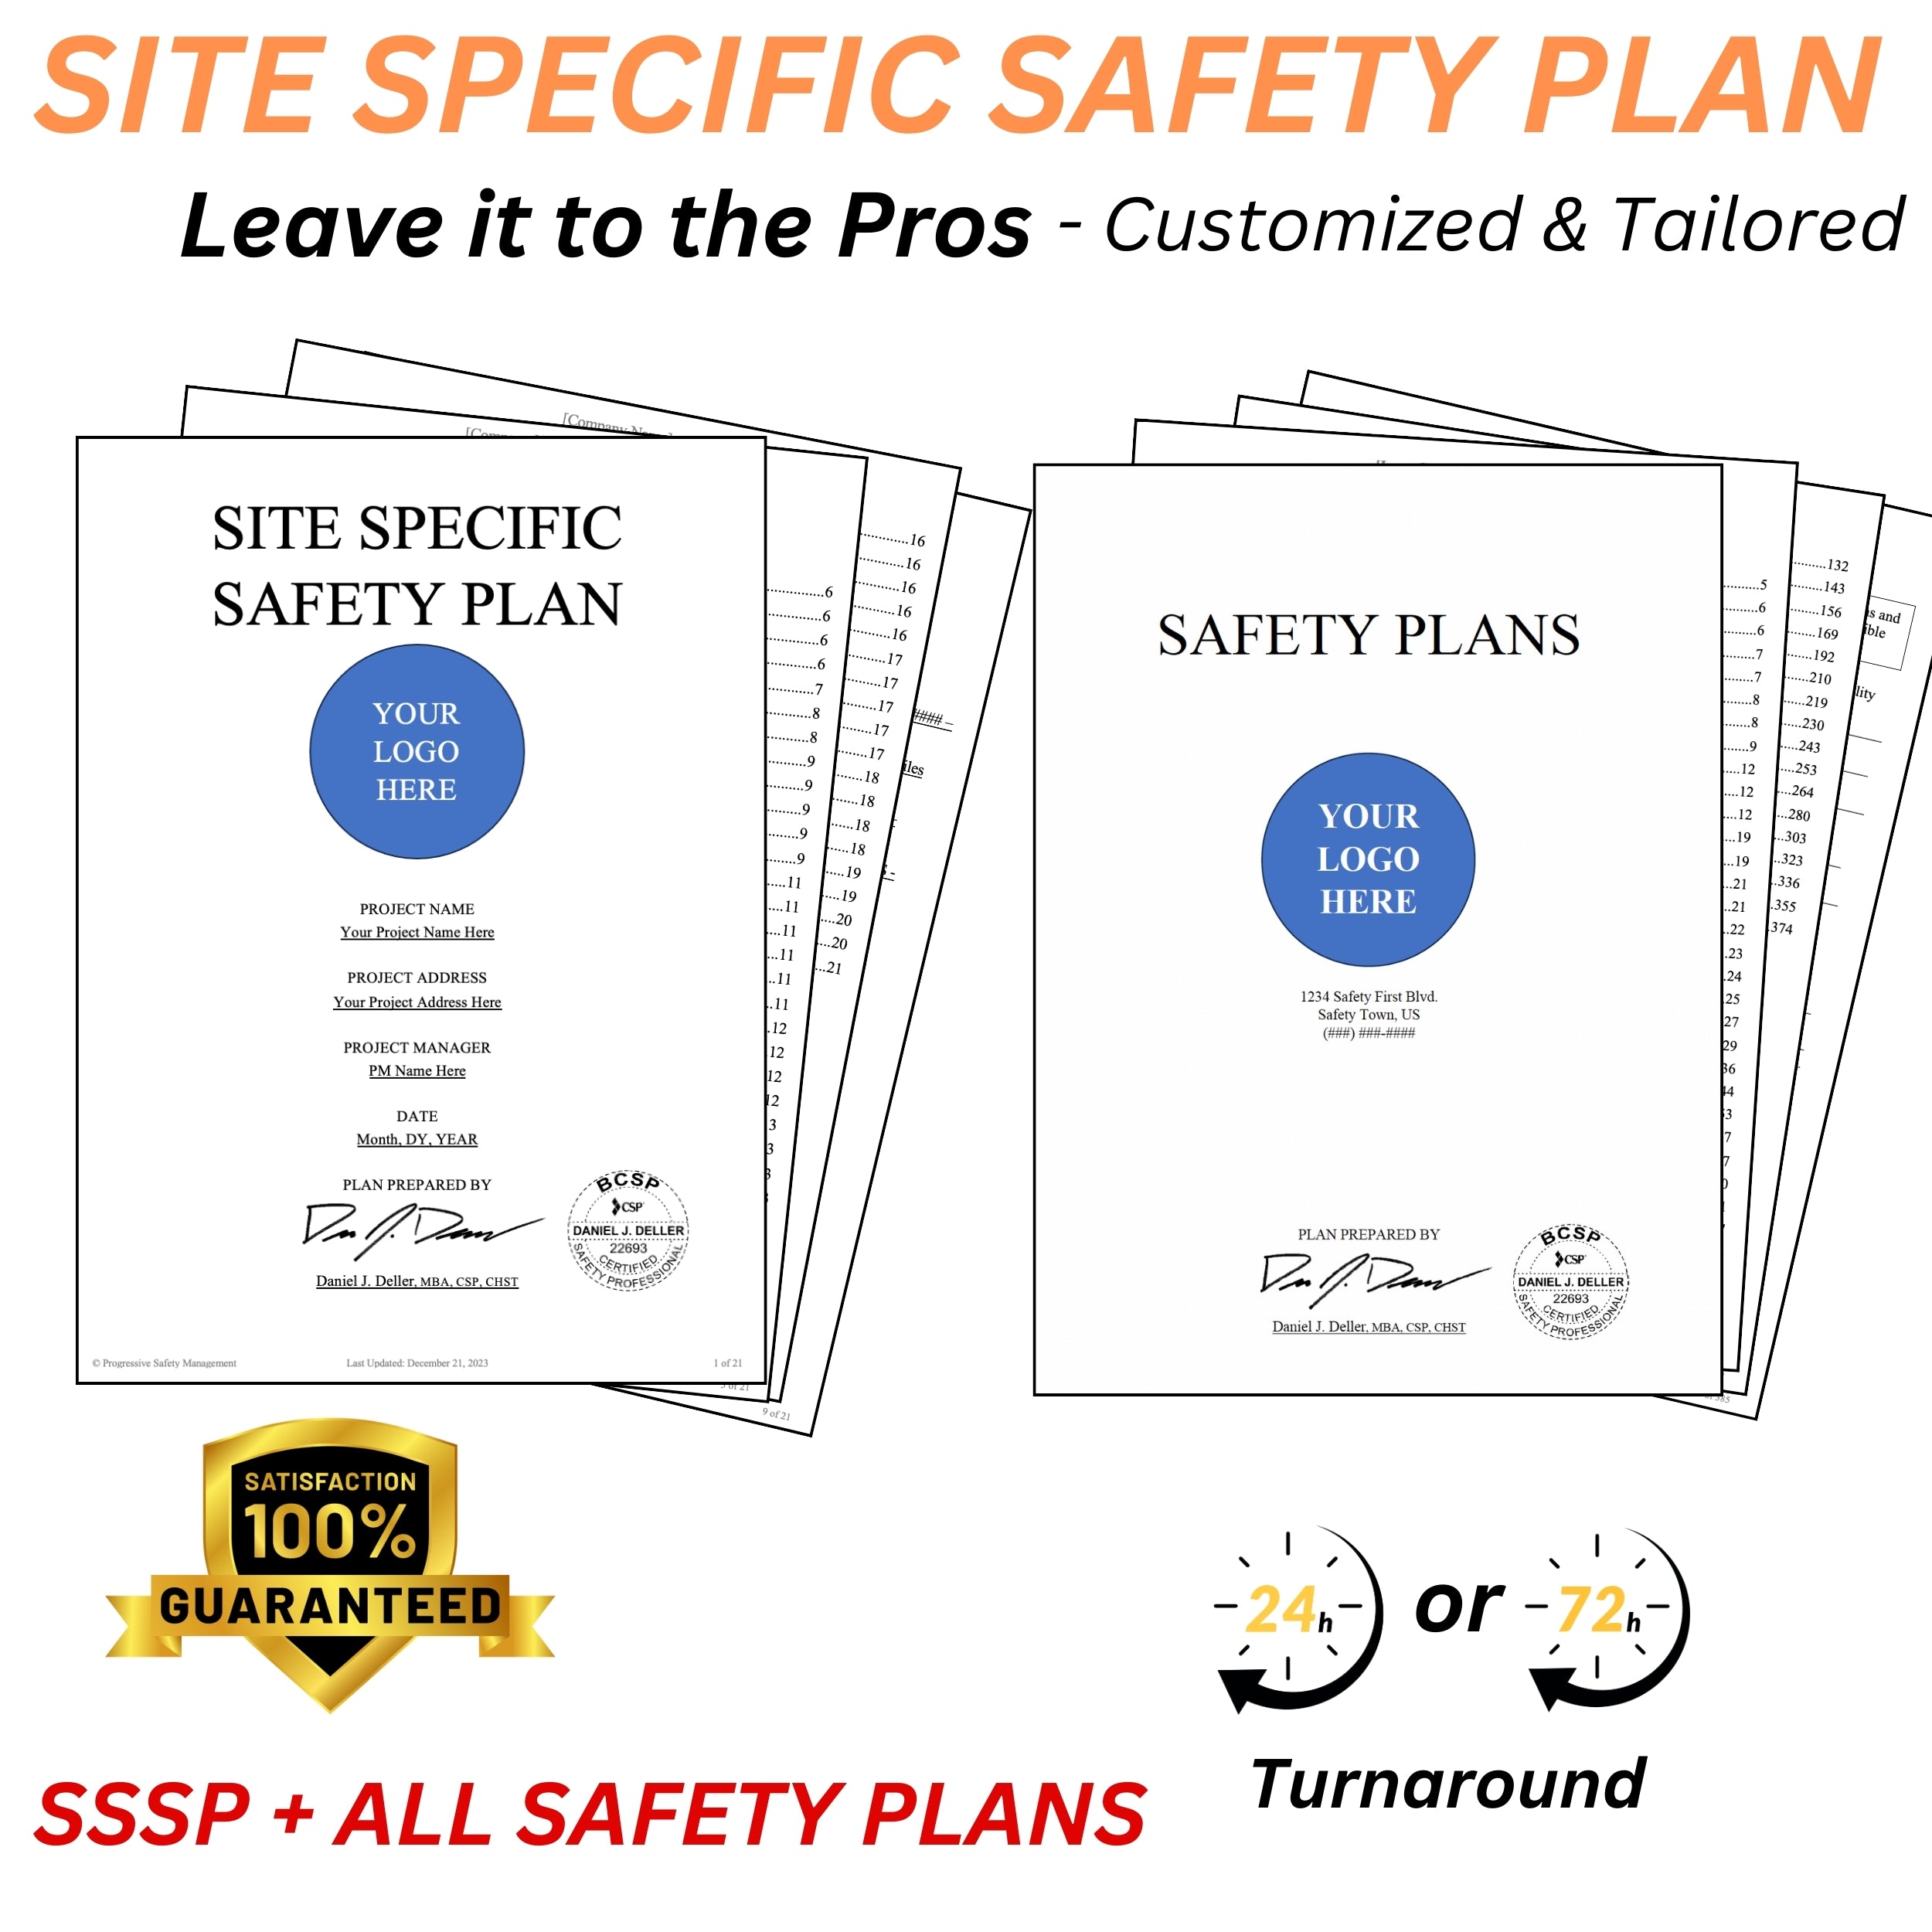 Site Specific Safety Plan